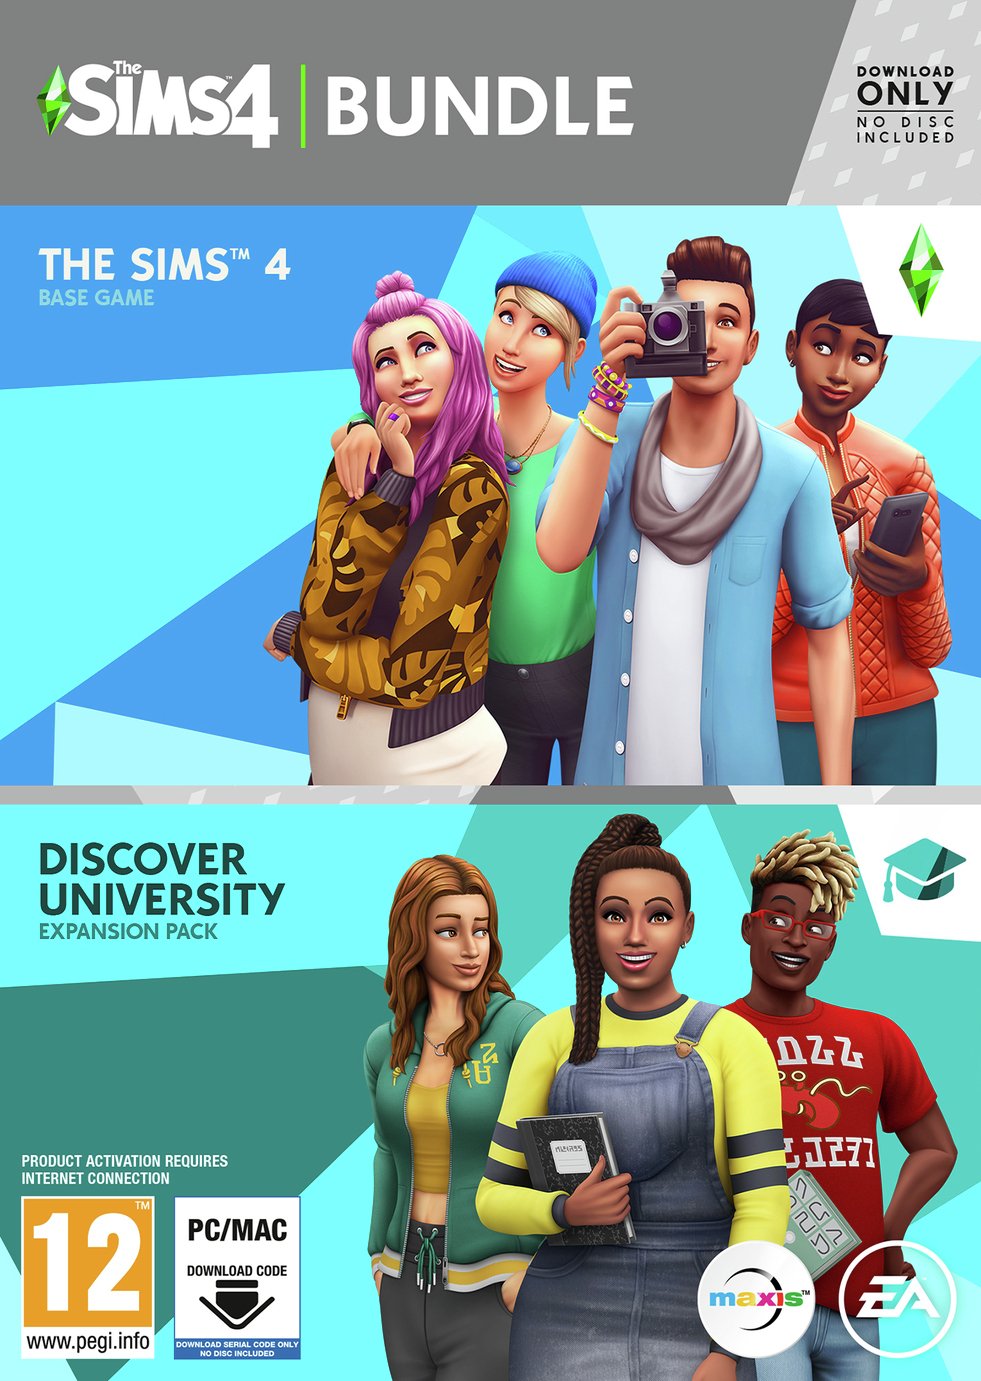 The Sims 4 Discover University PC Game & Expansion Pack Review